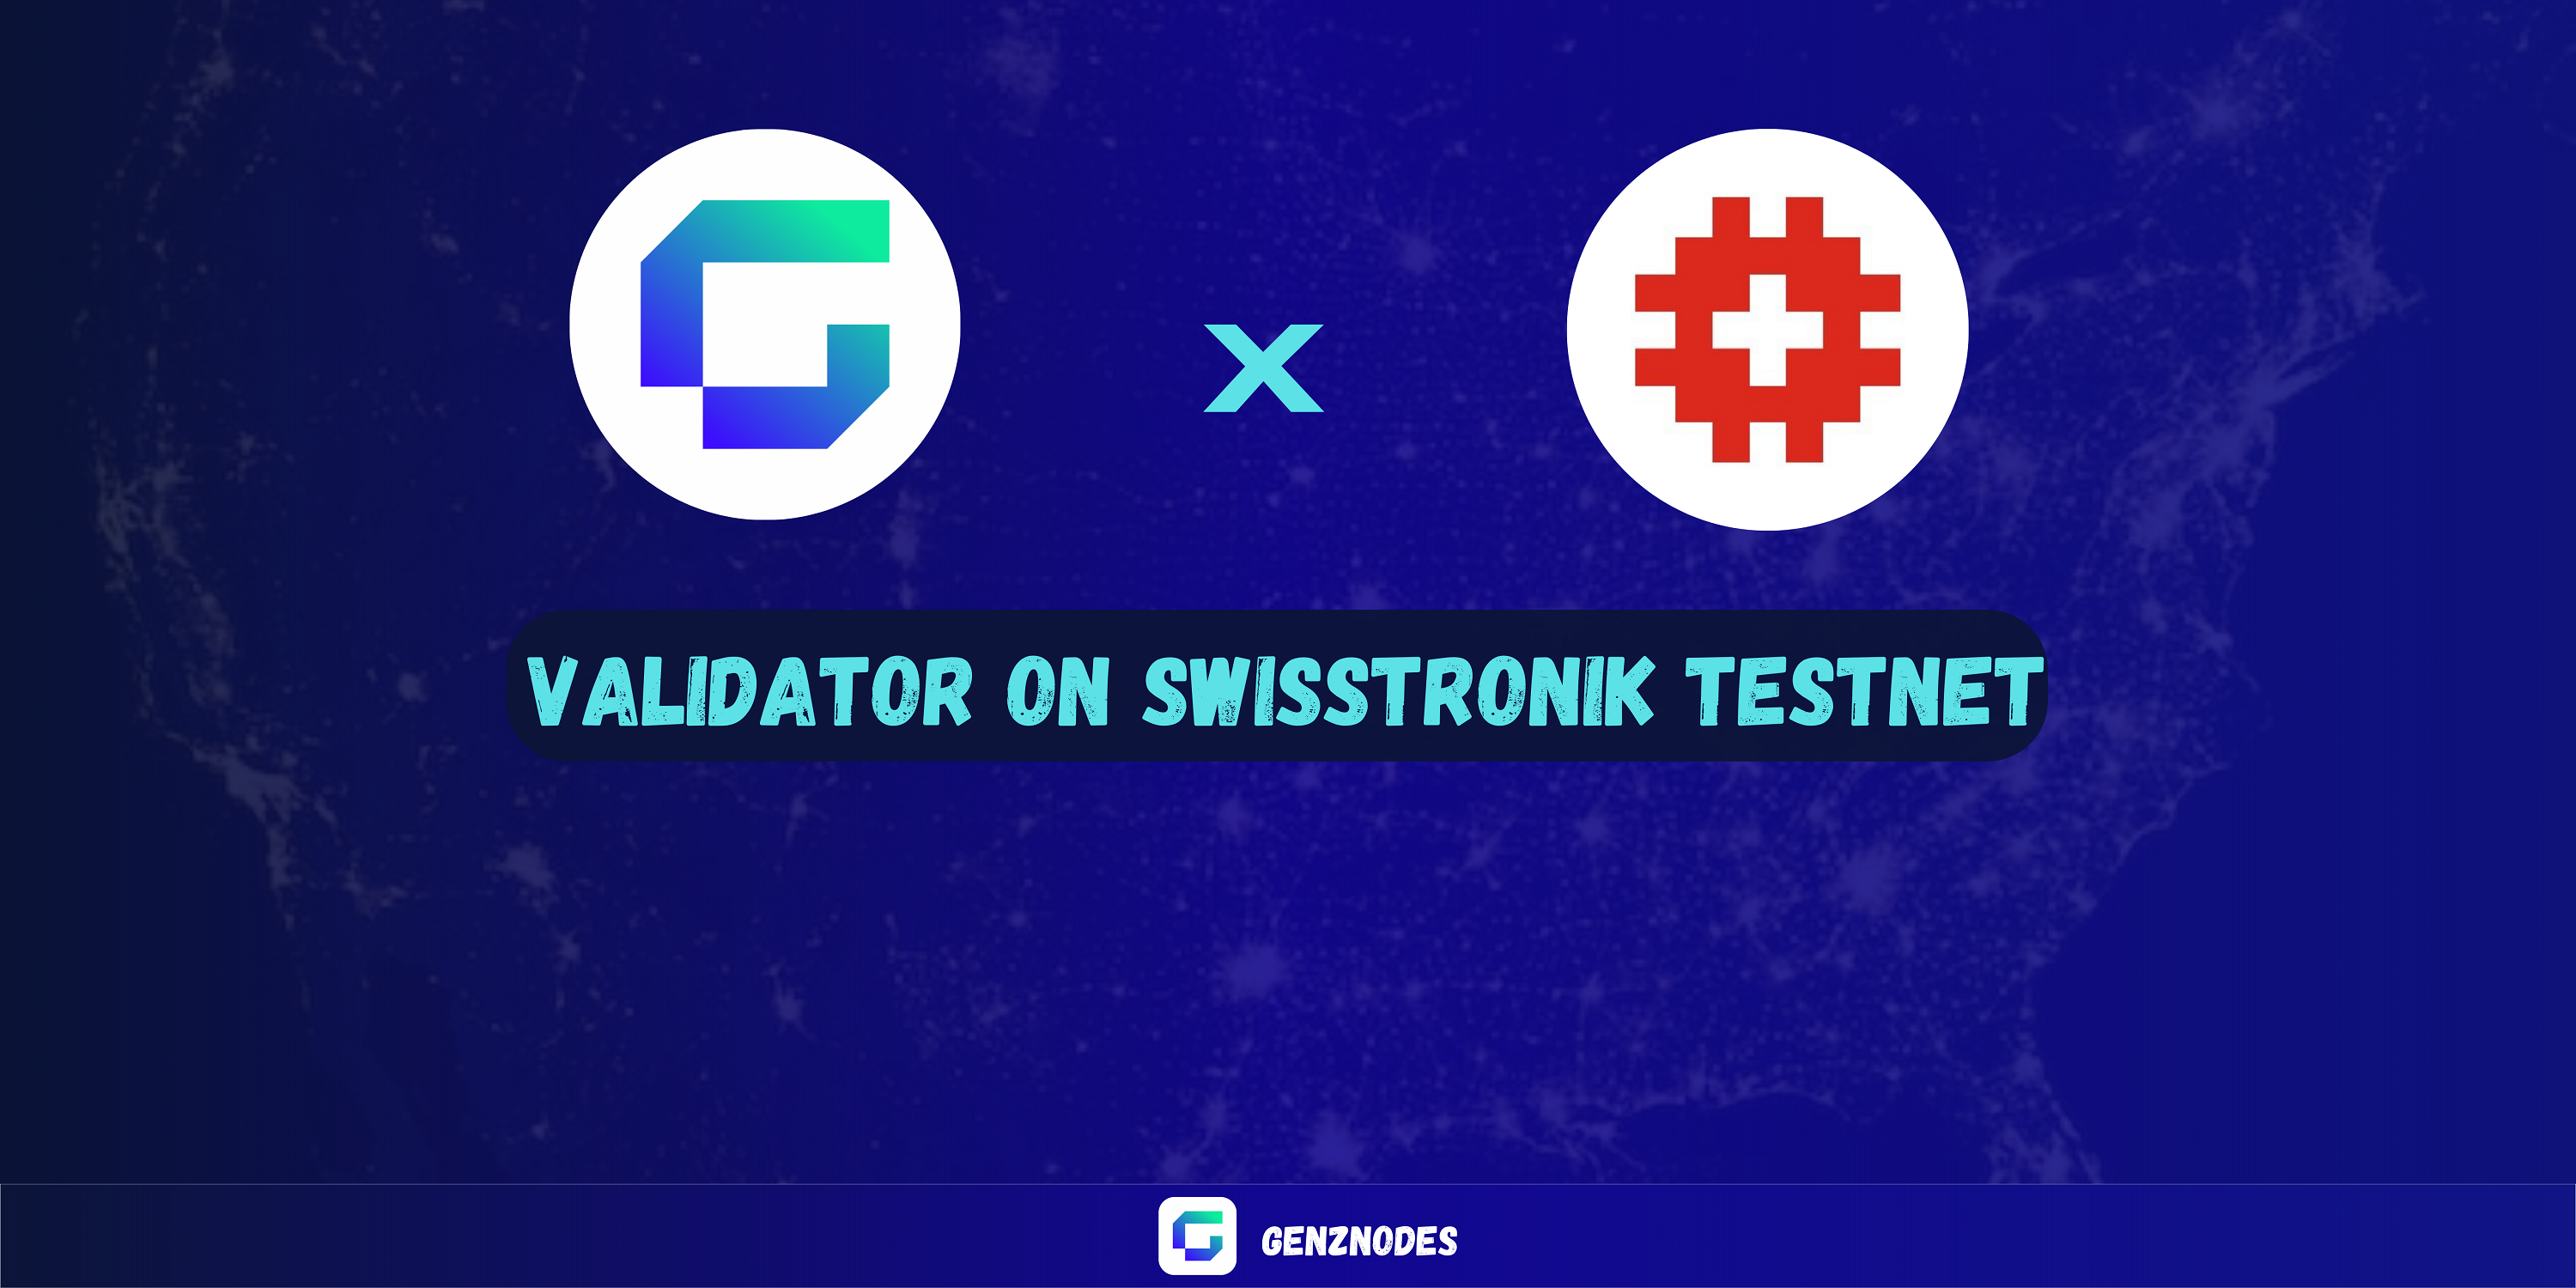 Swisstronik is a layer 1 solution built on the Cosmos SDK framework. It aims to combine the benefits of the Ethereum Virtual Machine (EVM) with the underlying infrastructure provided by the Cosmos SDK. This integration allows Swisstronik to offer Ethereum compatibility while providing additional features such as private EVM execution using Intel SGX.